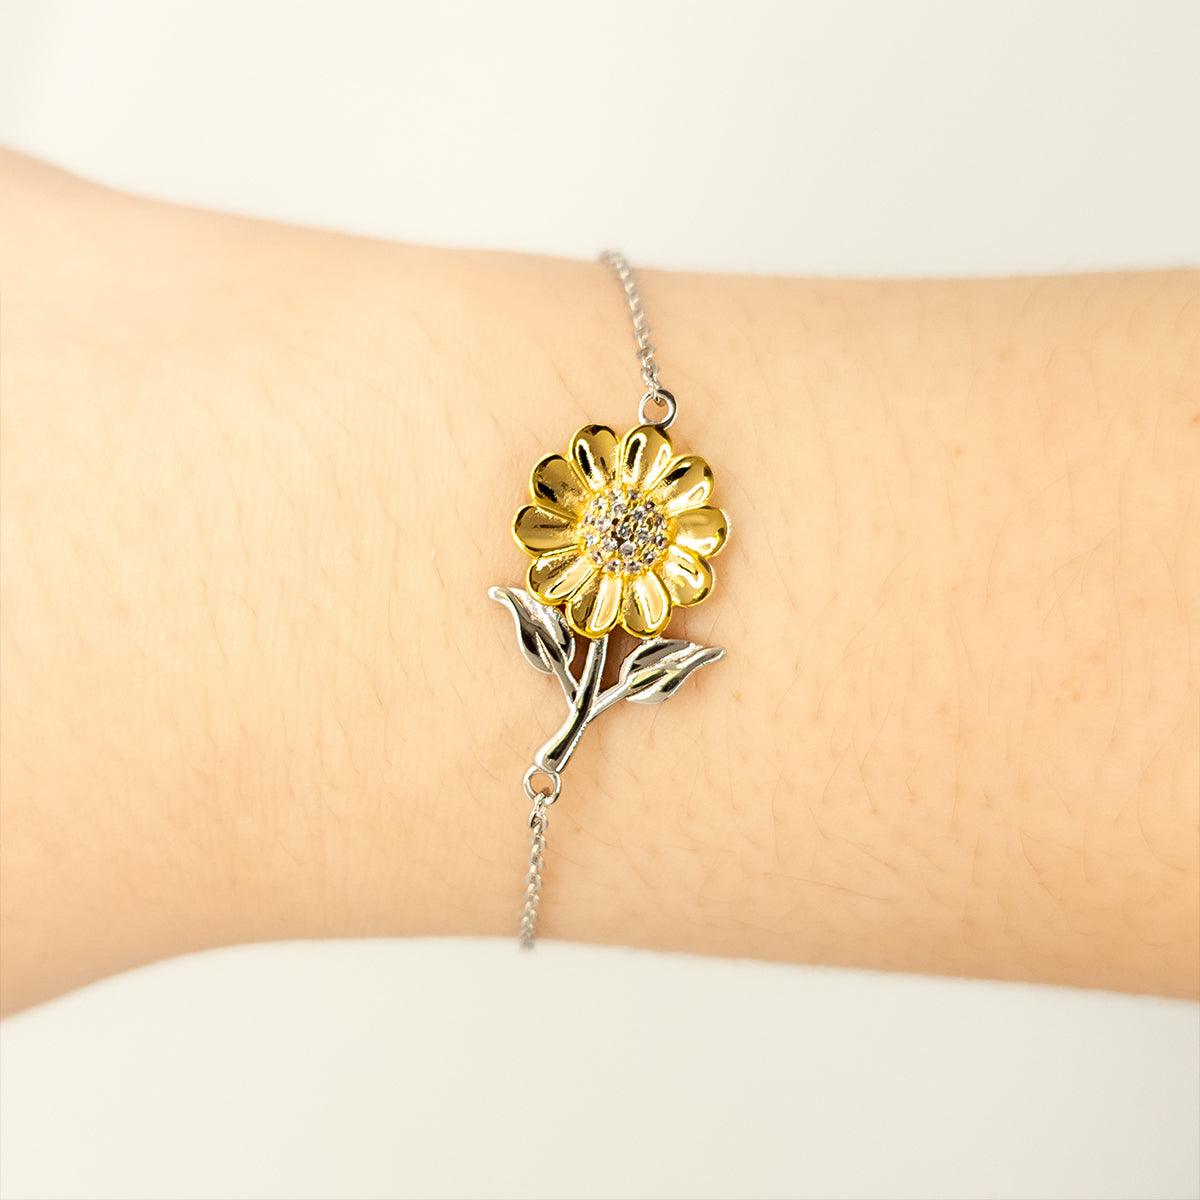 Linguist Sunflower Bracelet - Thanks for being who you are - Birthday Christmas Jewelry Gifts Coworkers Colleague Boss - Mallard Moon Gift Shop